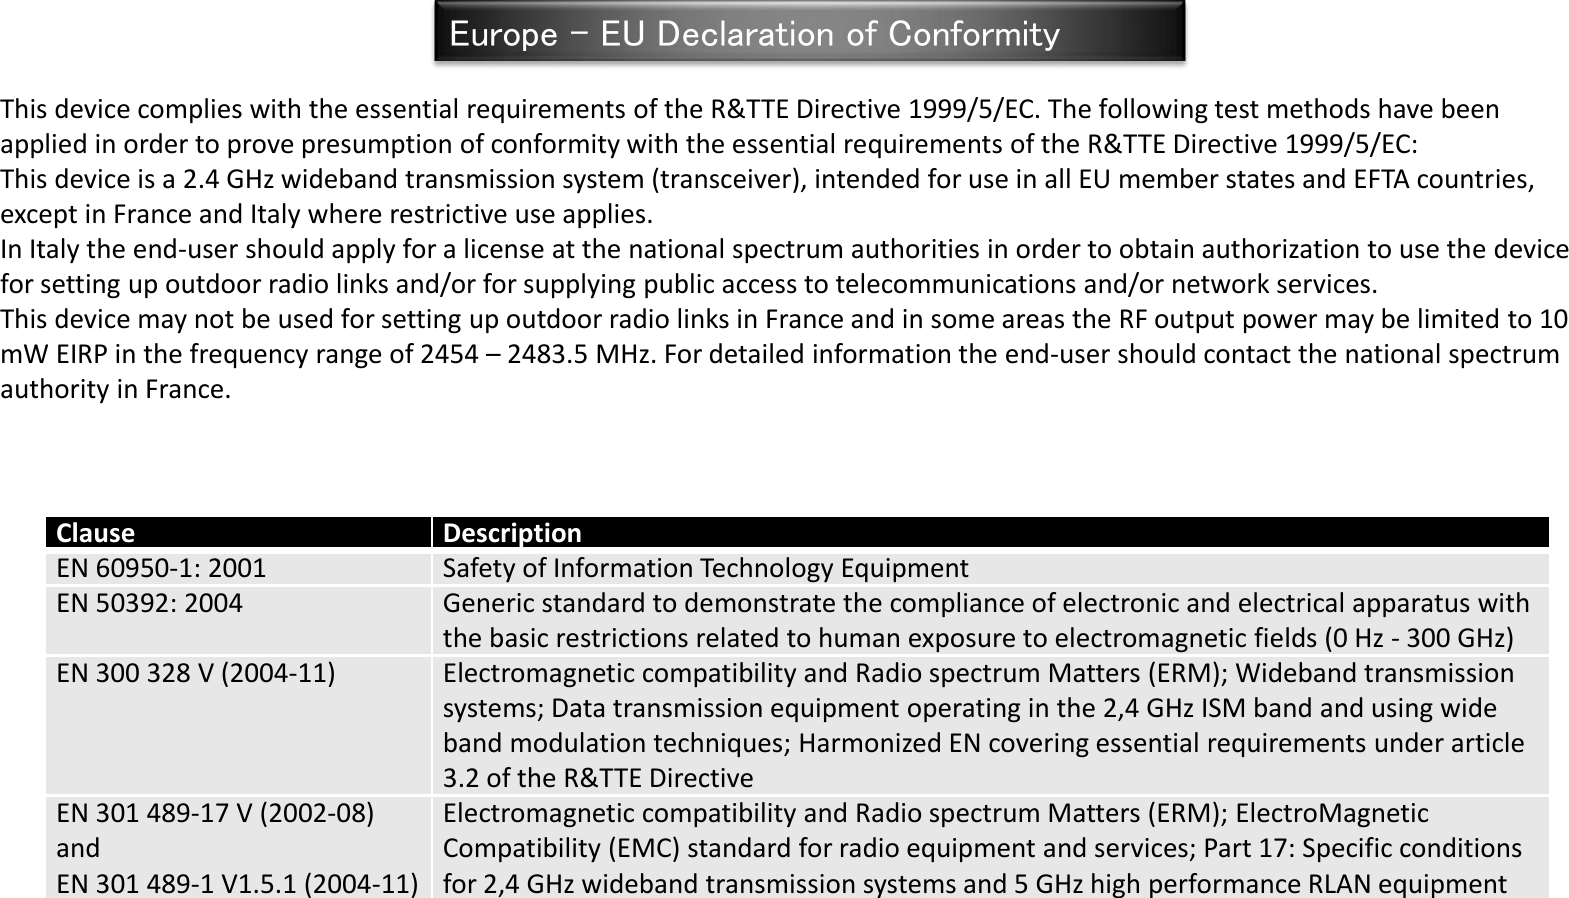 Clause Description EN 60950-1: 2001 Safety of Information Technology Equipment EN 50392: 2004 Generic standard to demonstrate the compliance of electronic and electrical apparatus with the basic restrictions related to human exposure to electromagnetic fields (0 Hz - 300 GHz) EN 300 328 V (2004-11) Electromagnetic compatibility and Radio spectrum Matters (ERM); Wideband transmission systems; Data transmission equipment operating in the 2,4 GHz ISM band and using wide band modulation techniques; Harmonized EN covering essential requirements under article 3.2 of the R&amp;TTE Directive EN 301 489-17 V (2002-08) and EN 301 489-1 V1.5.1 (2004-11) Electromagnetic compatibility and Radio spectrum Matters (ERM); ElectroMagnetic Compatibility (EMC) standard for radio equipment and services; Part 17: Specific conditions for 2,4 GHz wideband transmission systems and 5 GHz high performance RLAN equipment This device complies with the essential requirements of the R&amp;TTE Directive 1999/5/EC. The following test methods have been applied in order to prove presumption of conformity with the essential requirements of the R&amp;TTE Directive 1999/5/EC: This device is a 2.4 GHz wideband transmission system (transceiver), intended for use in all EU member states and EFTA countries, except in France and Italy where restrictive use applies. In Italy the end-user should apply for a license at the national spectrum authorities in order to obtain authorization to use the device for setting up outdoor radio links and/or for supplying public access to telecommunications and/or network services. This device may not be used for setting up outdoor radio links in France and in some areas the RF output power may be limited to 10 mW EIRP in the frequency range of 2454 – 2483.5 MHz. For detailed information the end-user should contact the national spectrum authority in France. Europe – EU Declaration of Conformity 